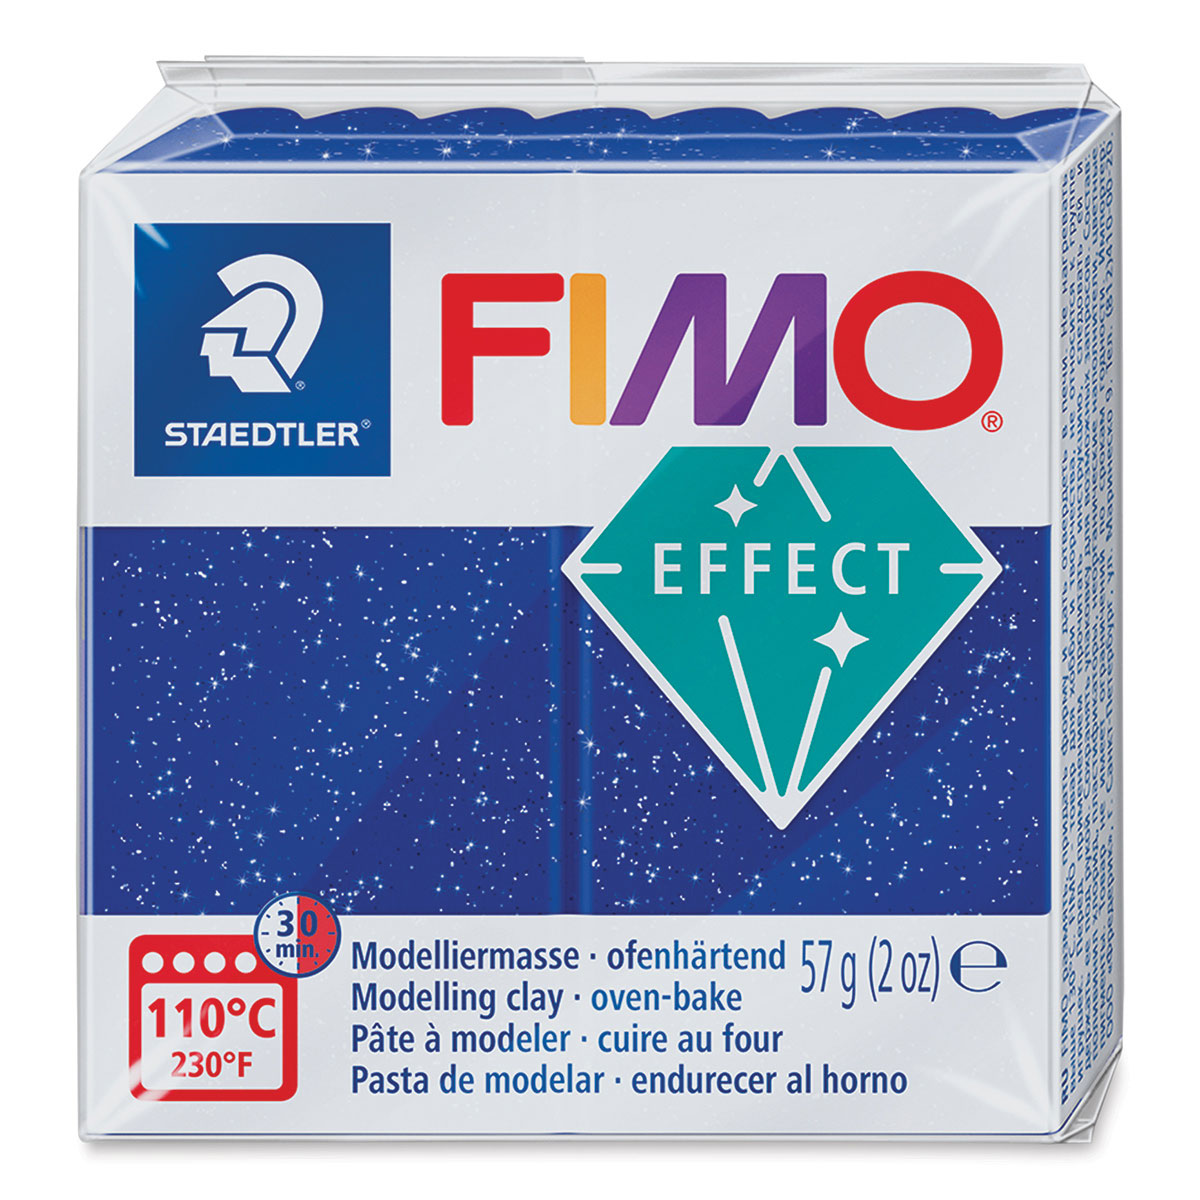 11 Staedtler Fimo Effect Metallic Gold Polymer Modelling Clay Oven Bake 56g 